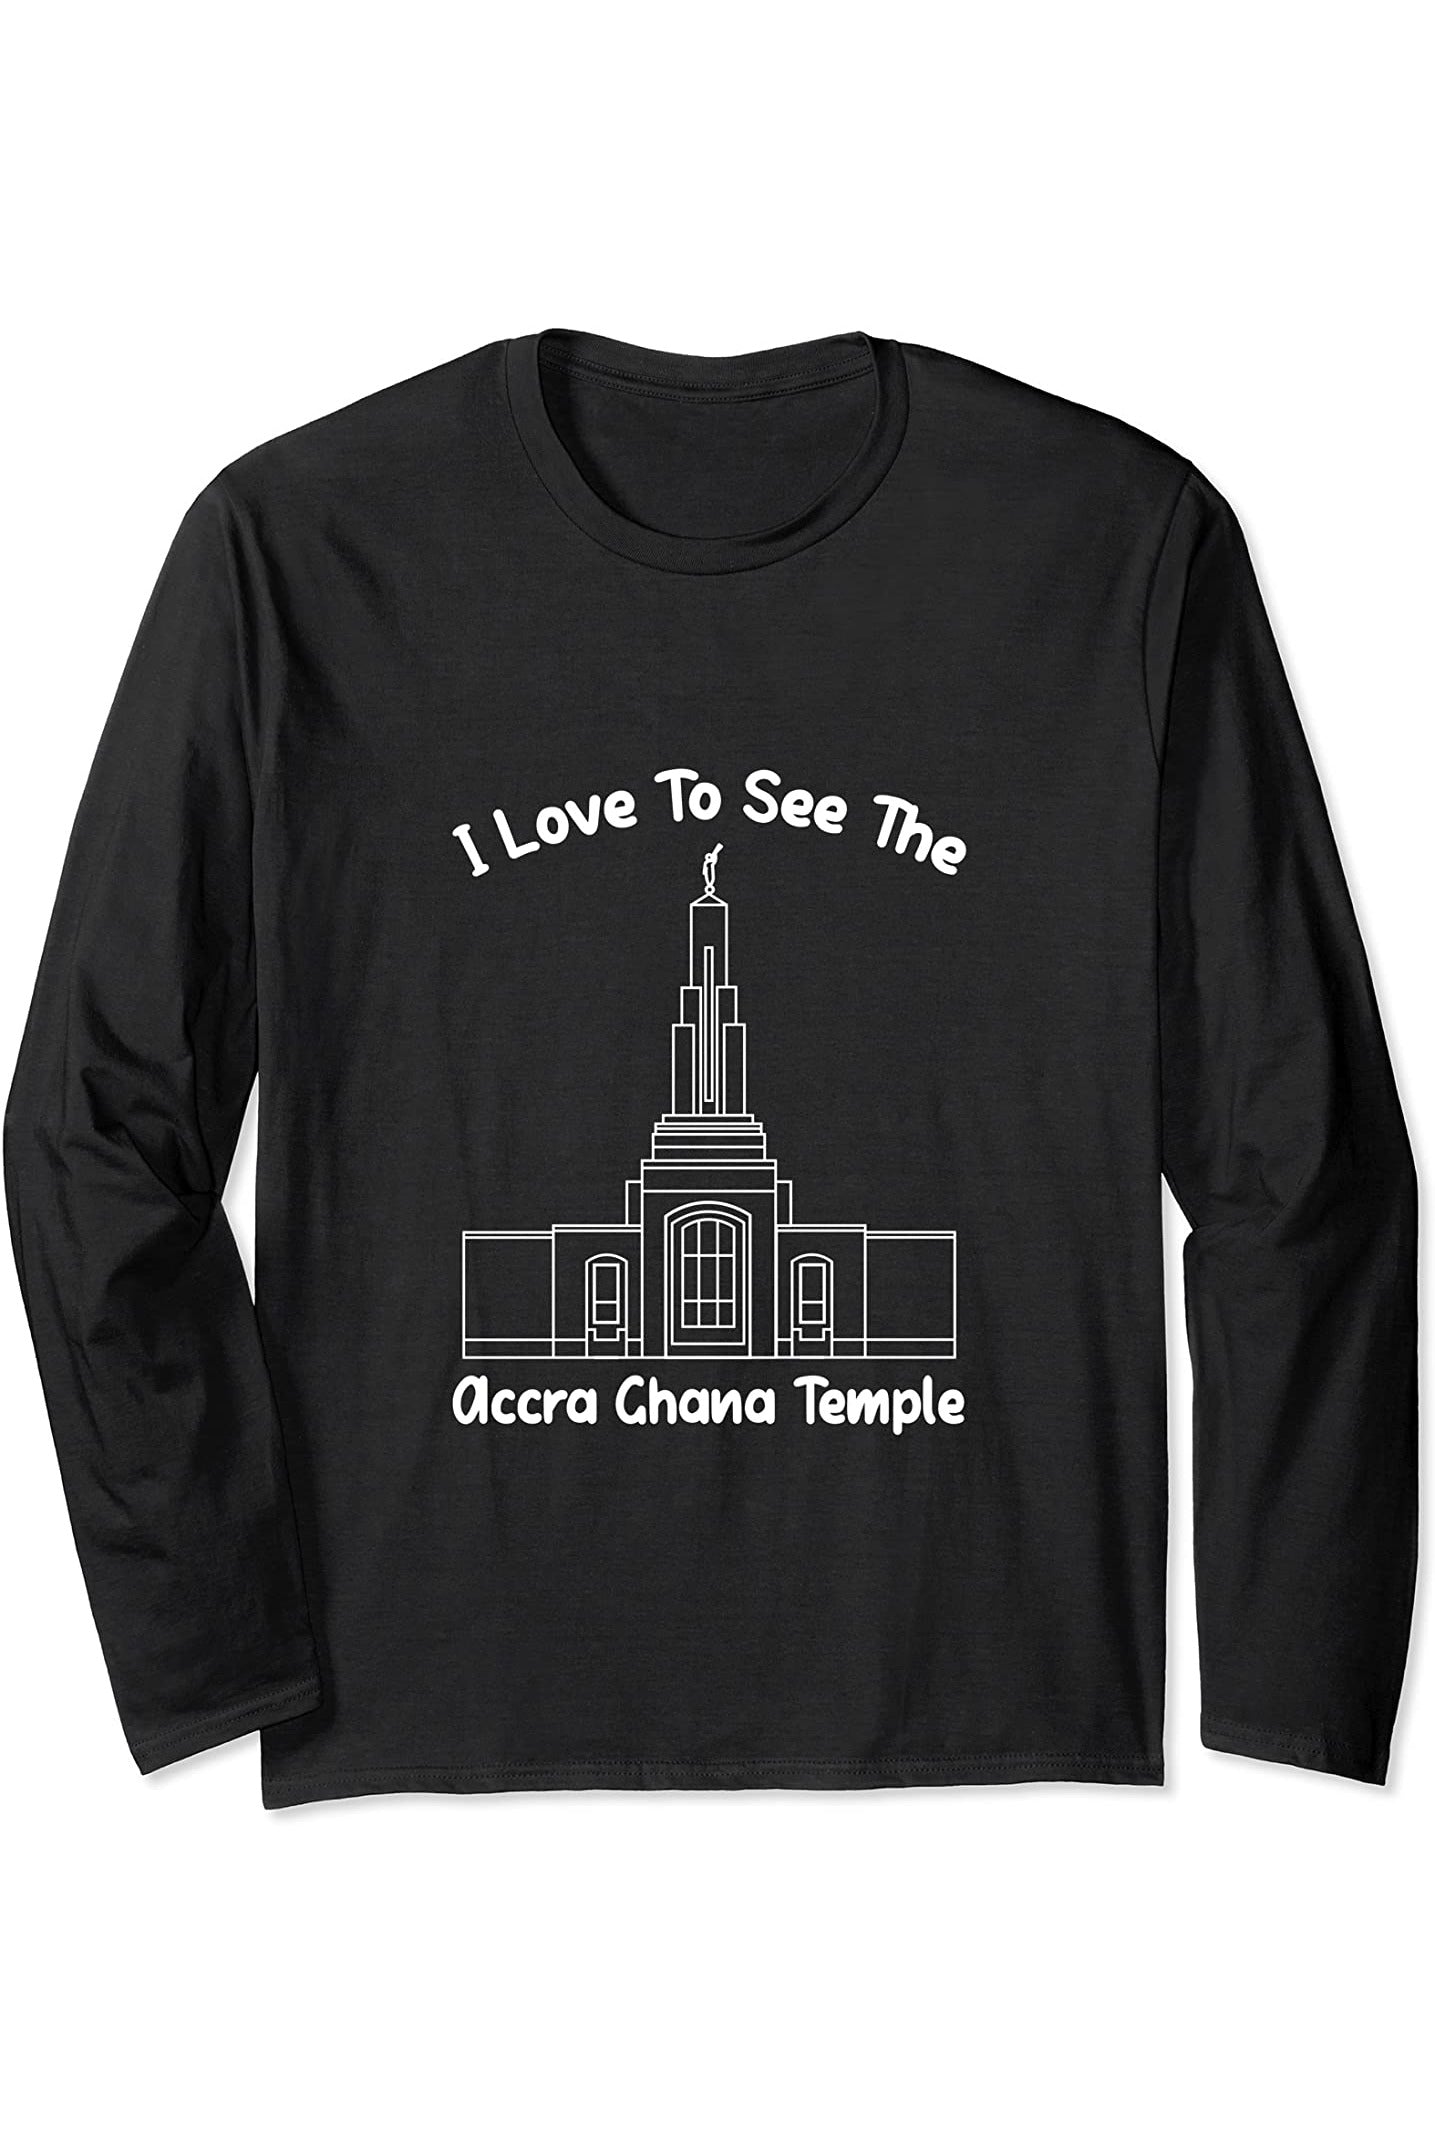 Accra Ghana Temple Long Sleeve T-Shirt - Primary Style (English) US